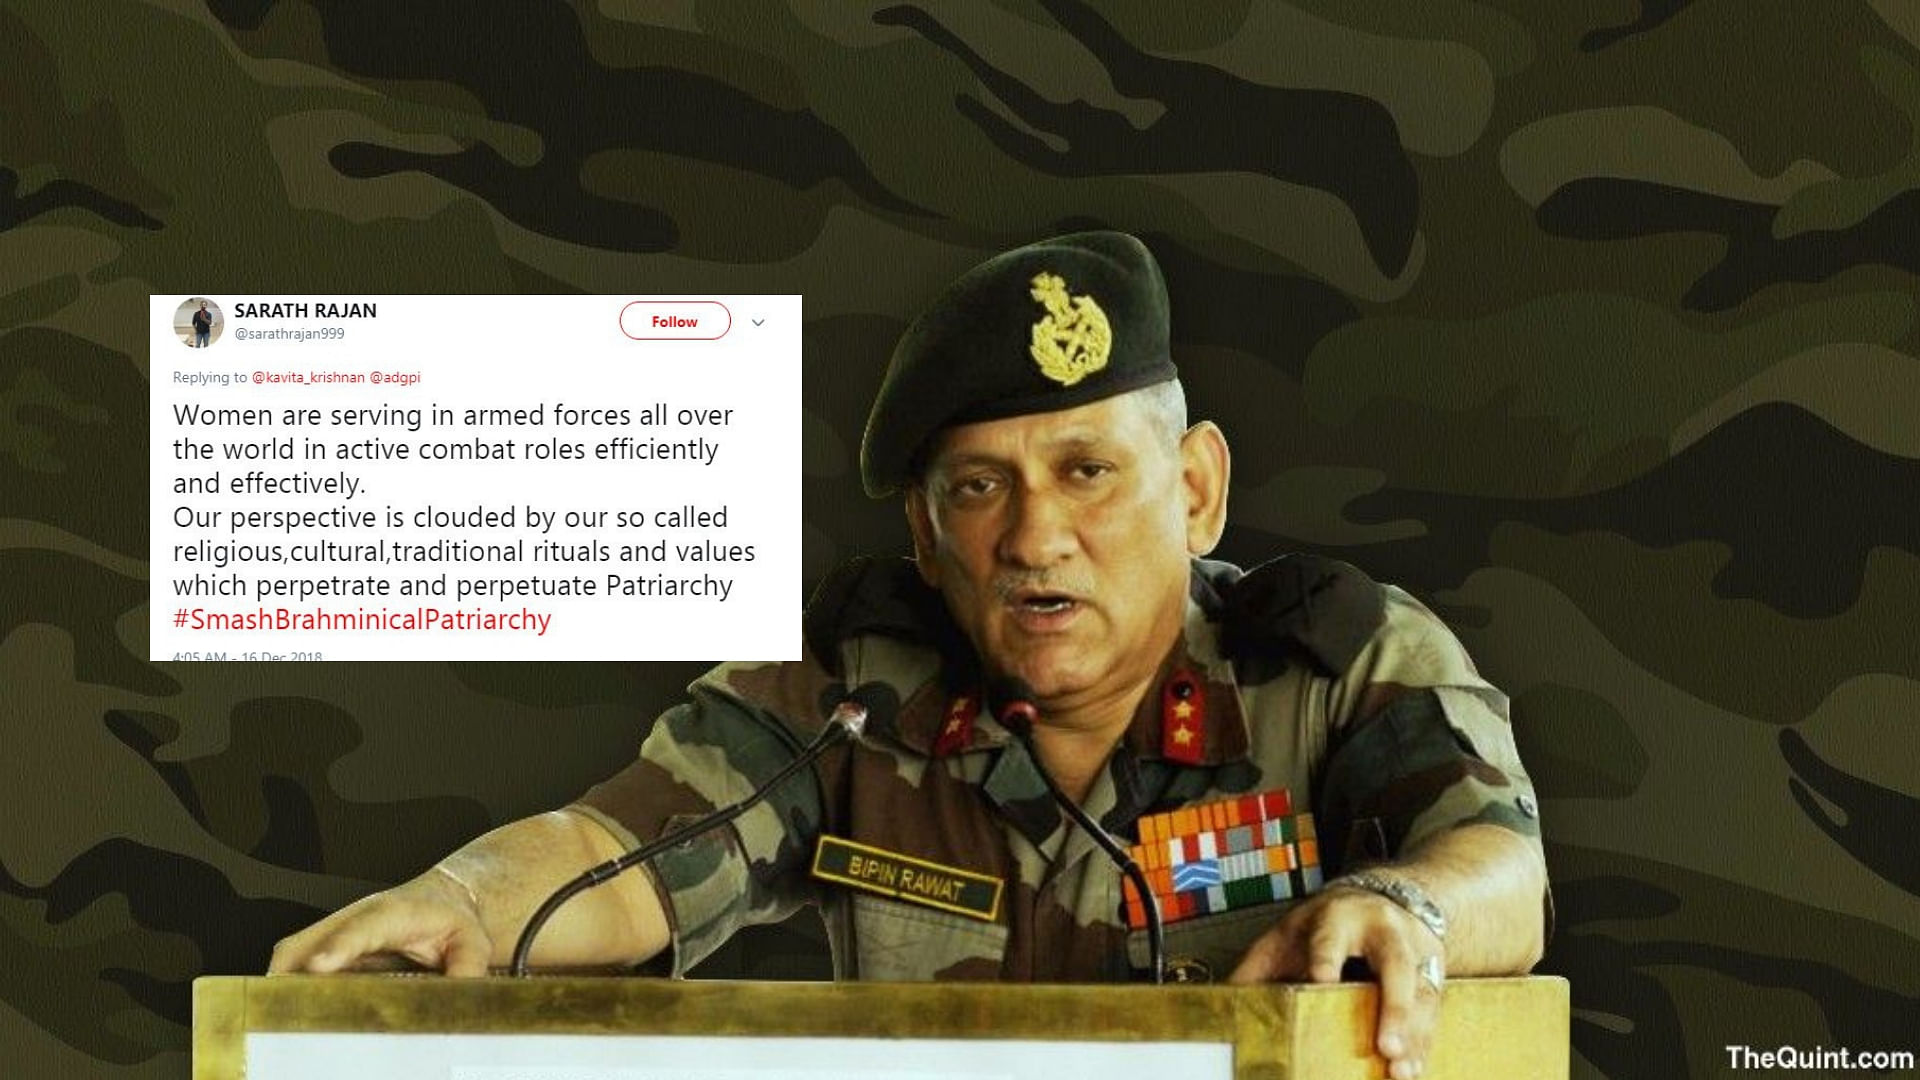 Army Chief General Bipin Rawat triggered a number of citizens’ outrage after he defended the decision to not allow women on the front lines of the Indian army’s operations